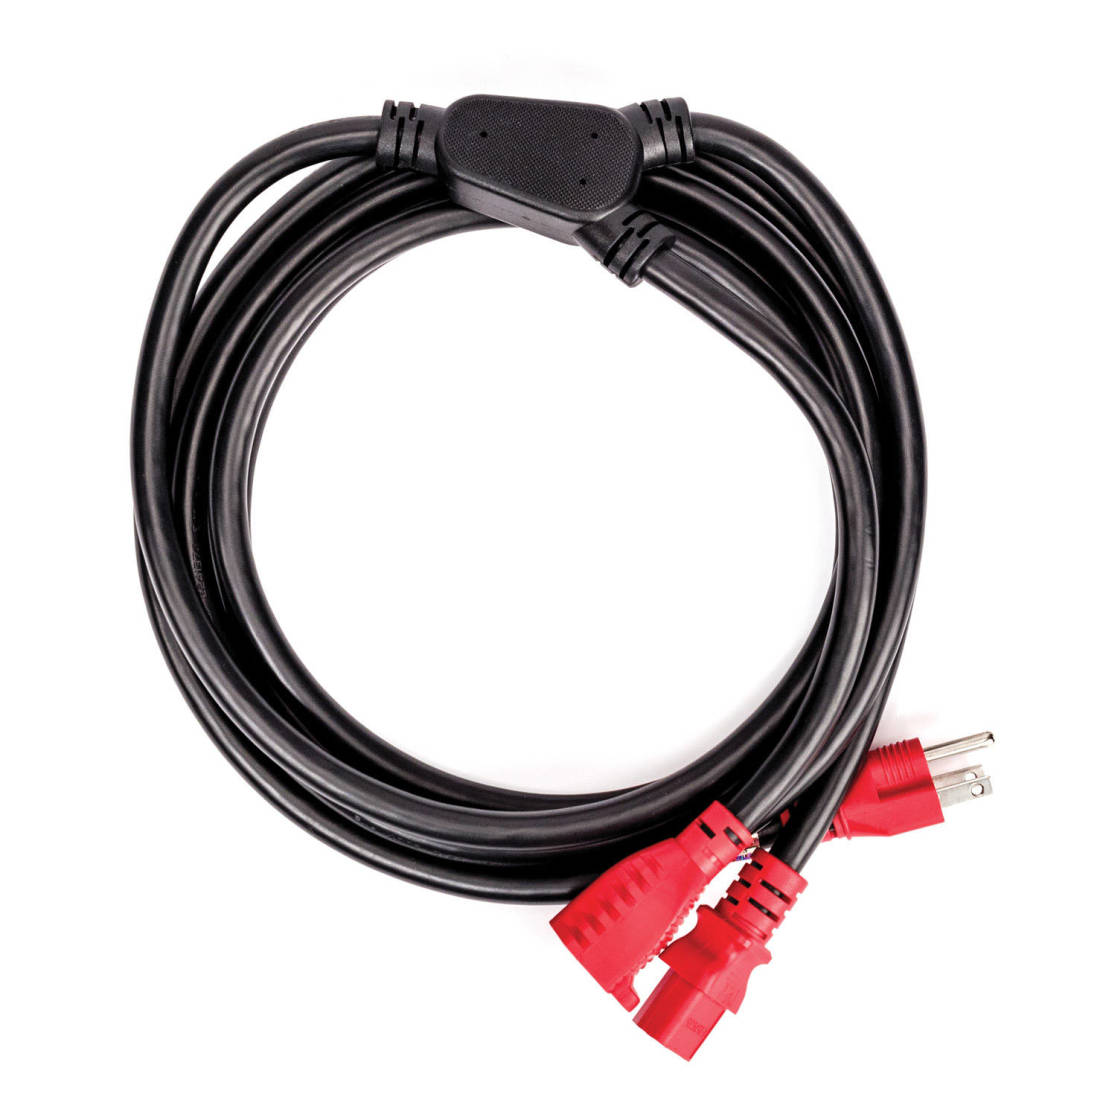 Power Cable Plus - 10ft